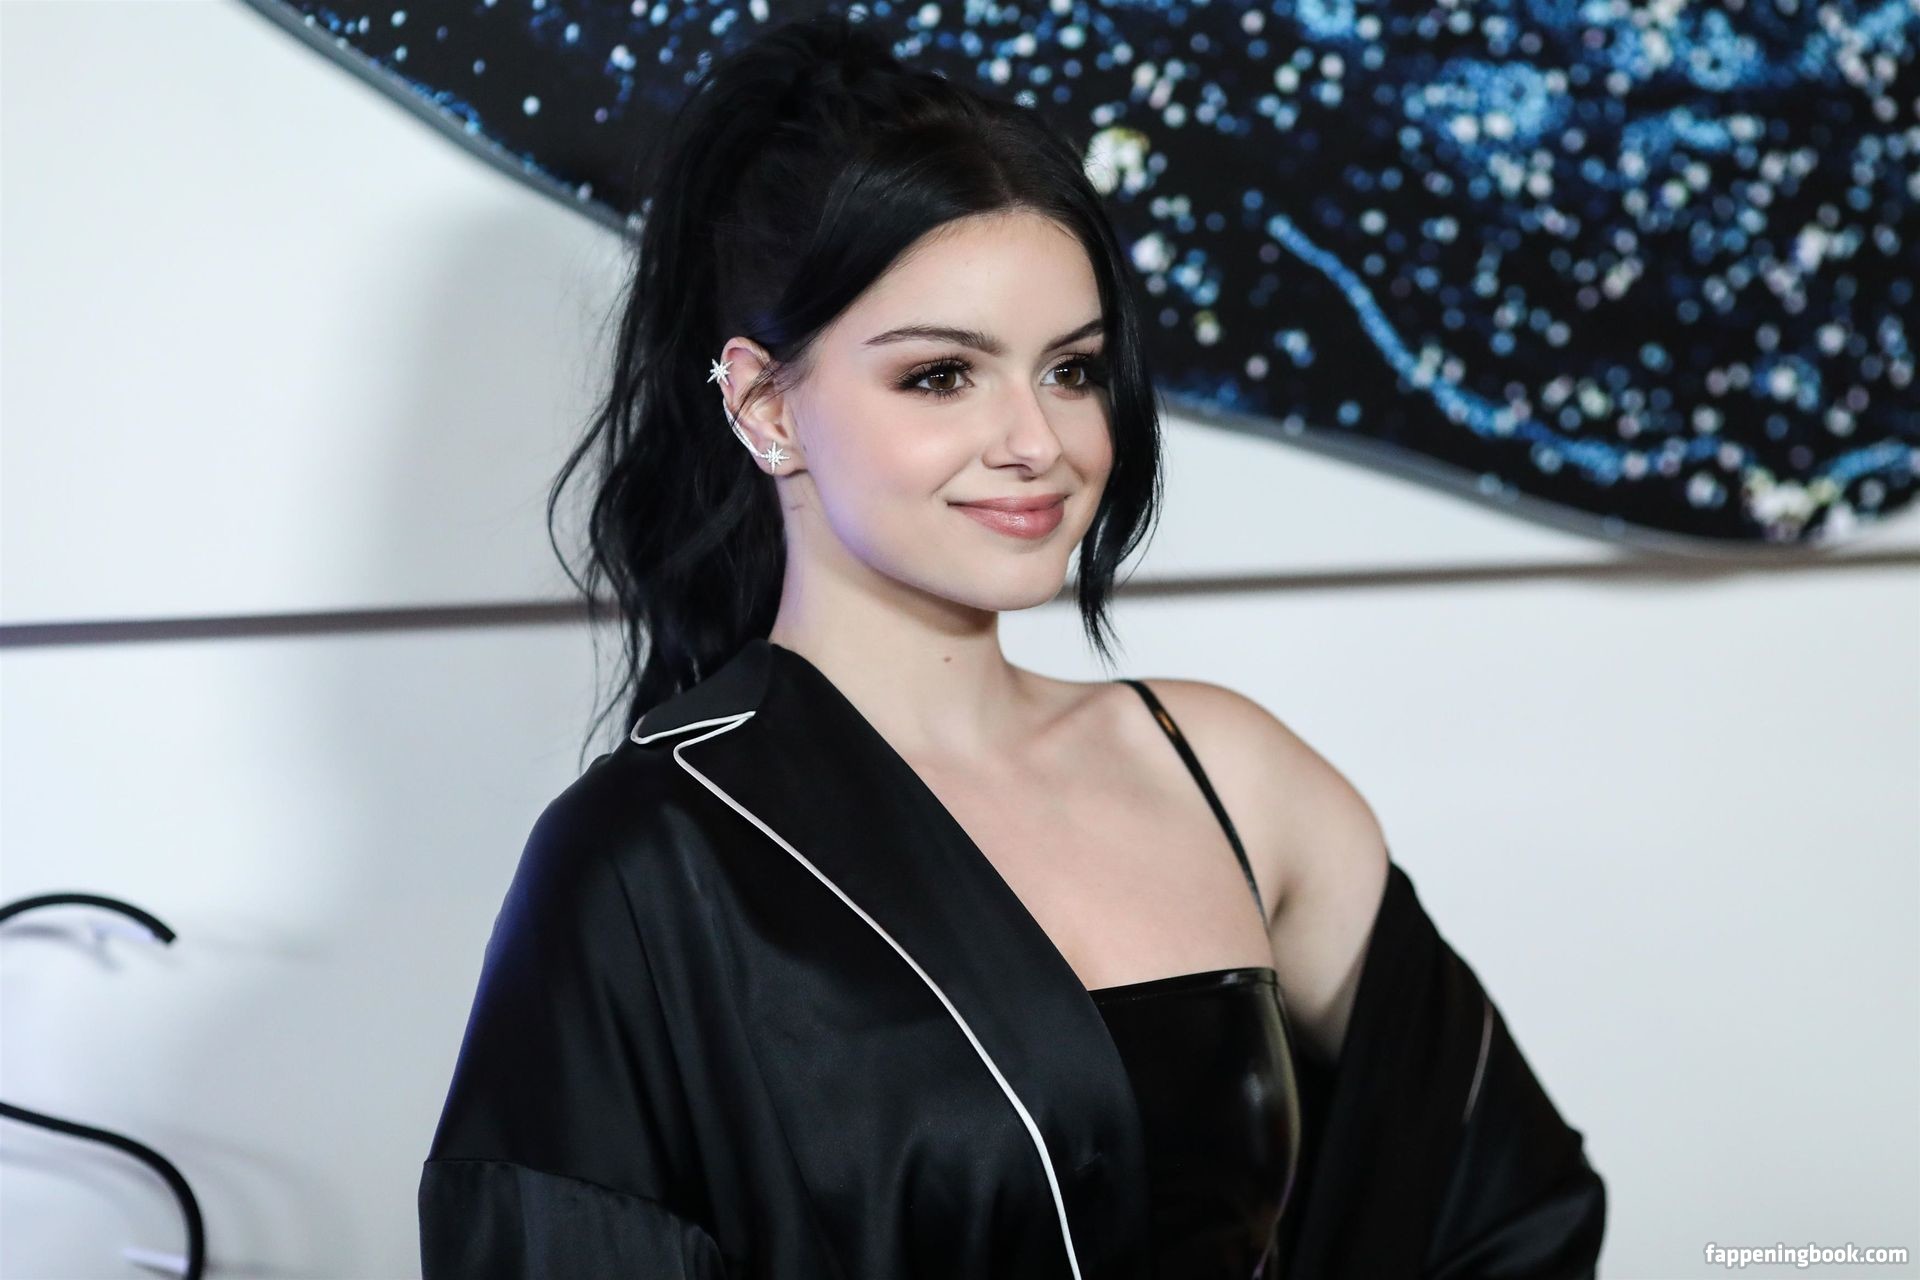 Ariel Winter Nude The Fappening - Page 15 - FappeningGram